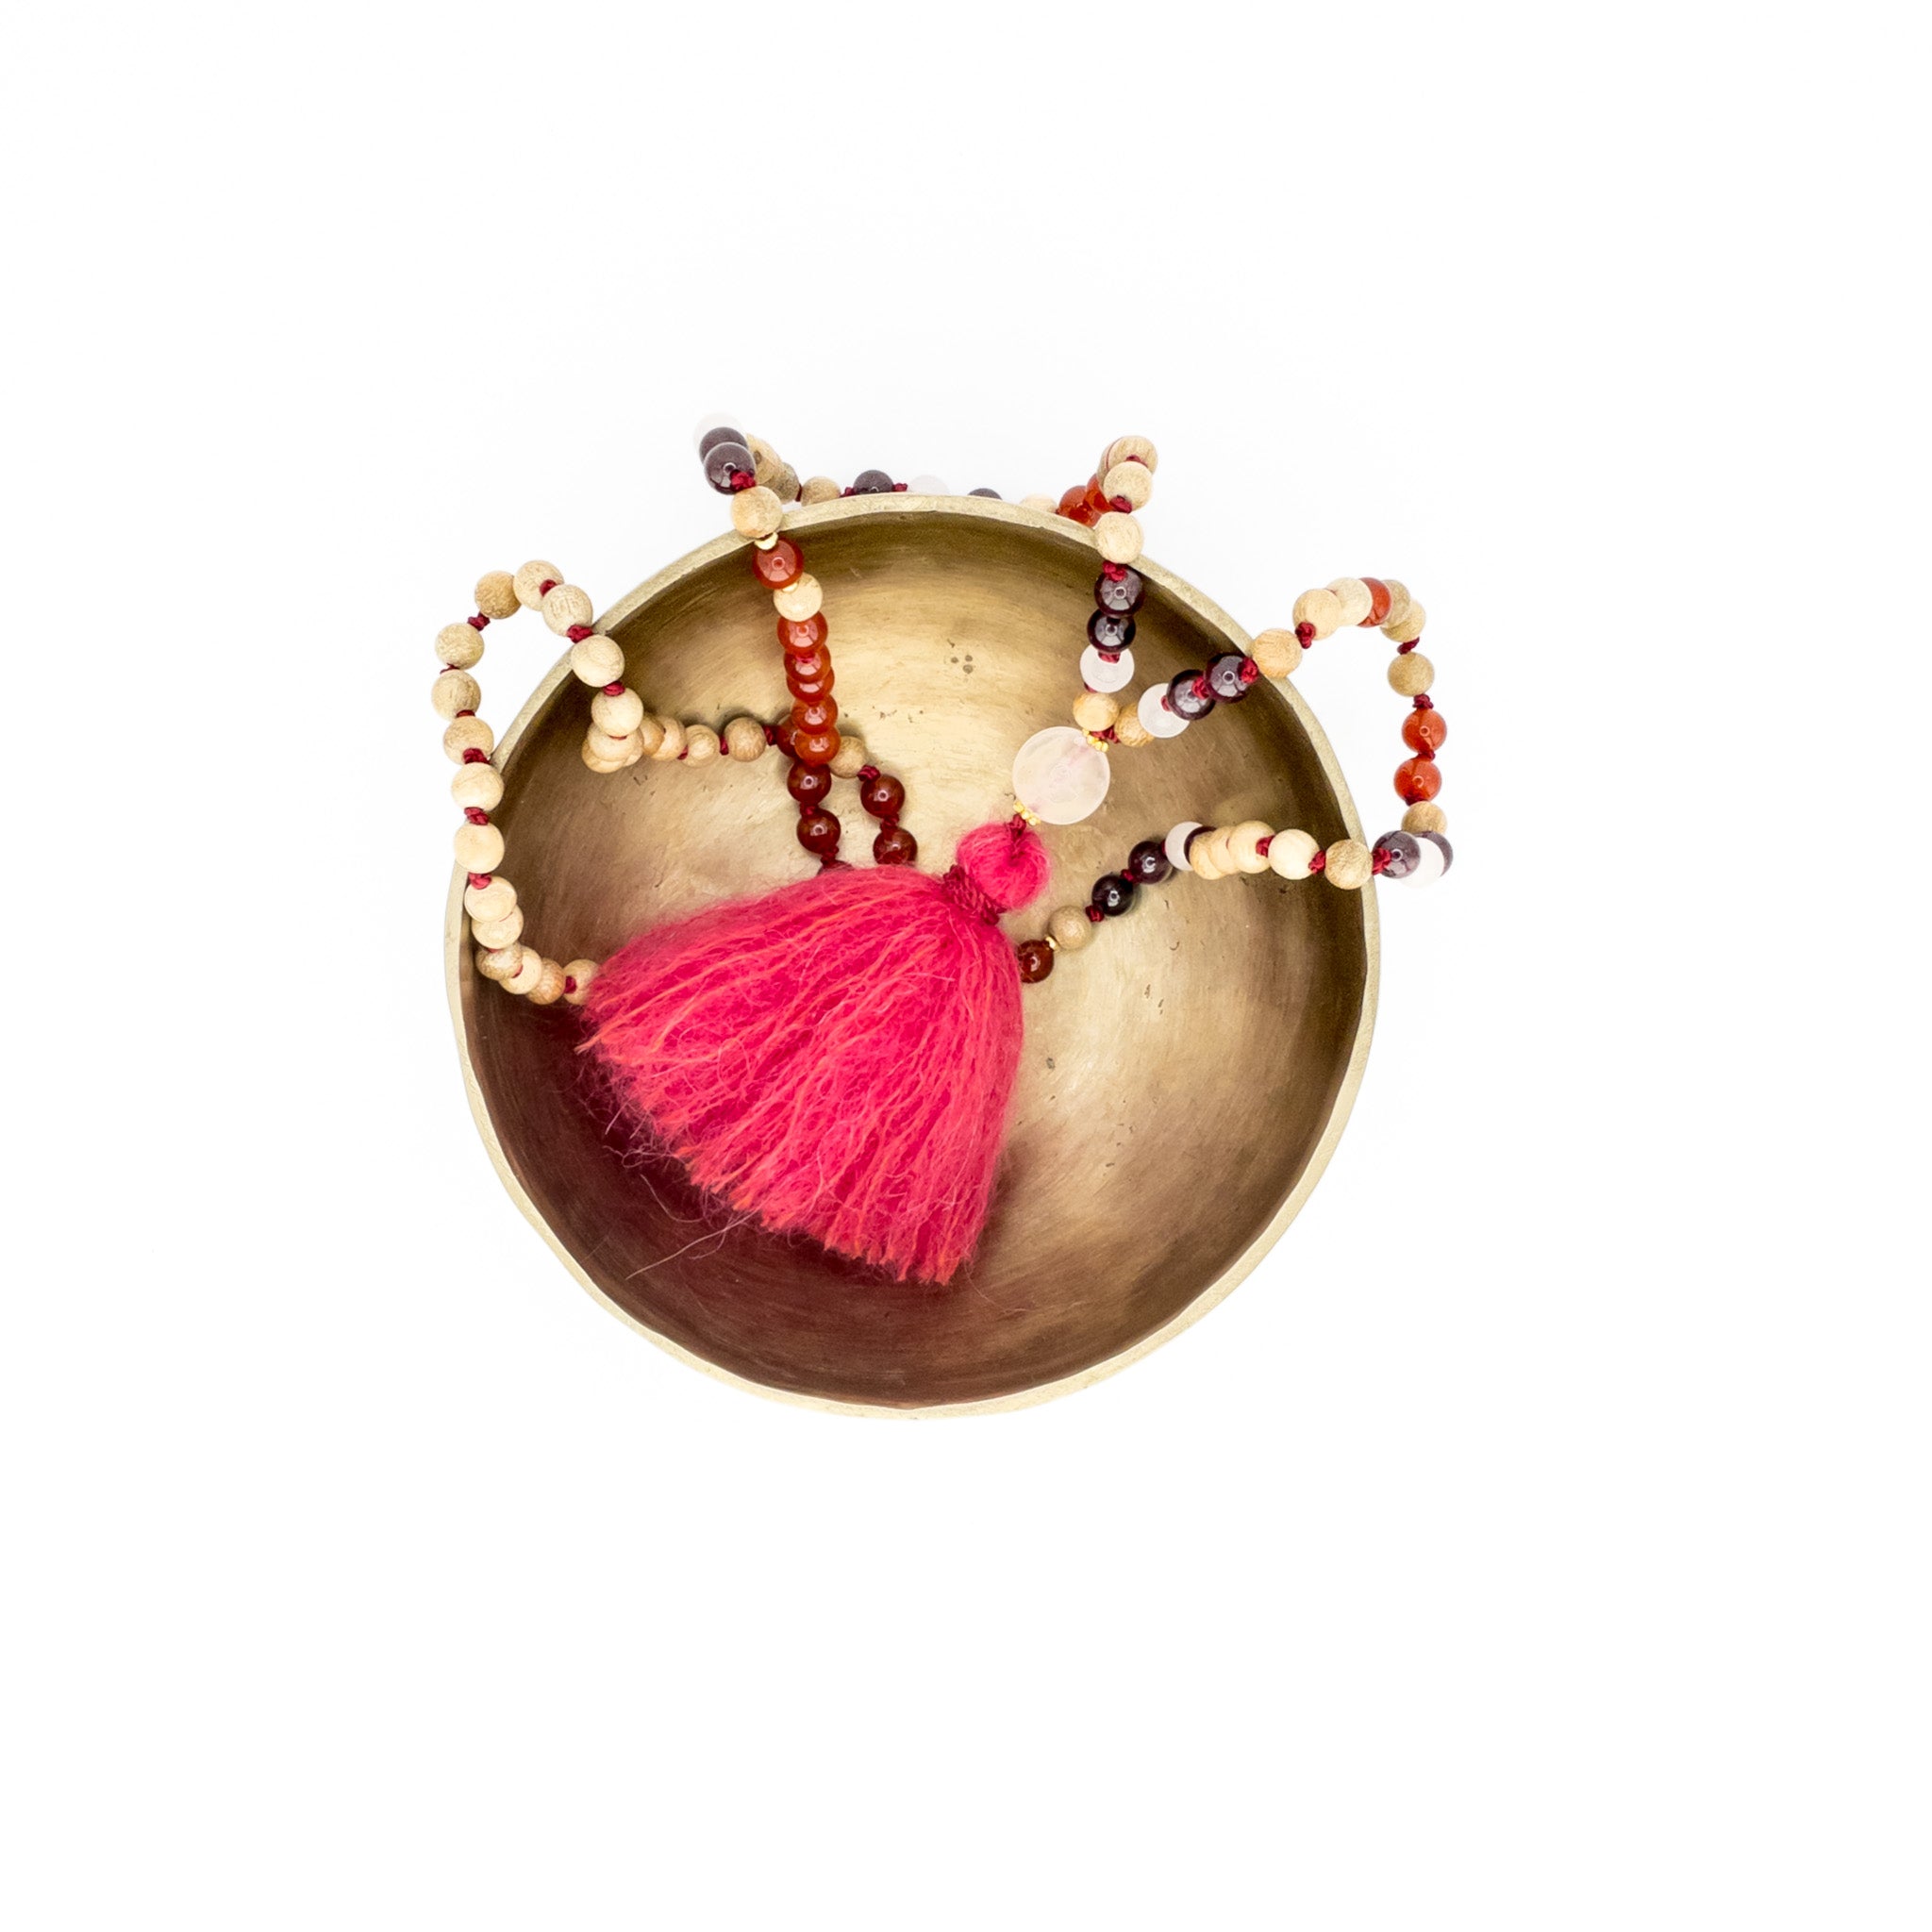 The Pink Petals Mala resting on a singing bowl, surrounded by other meditation and spiritual items. The mala is made with Rosewood beads, Carnelian, Garnet, and Pink Quartz beads, and is hand-knotted with a silk cord. The mala is adorned with a fluffy pink alpaca pompon and has a 12mm Ice Pink Quartz Guru Bead. shasha swiss mala jewellery